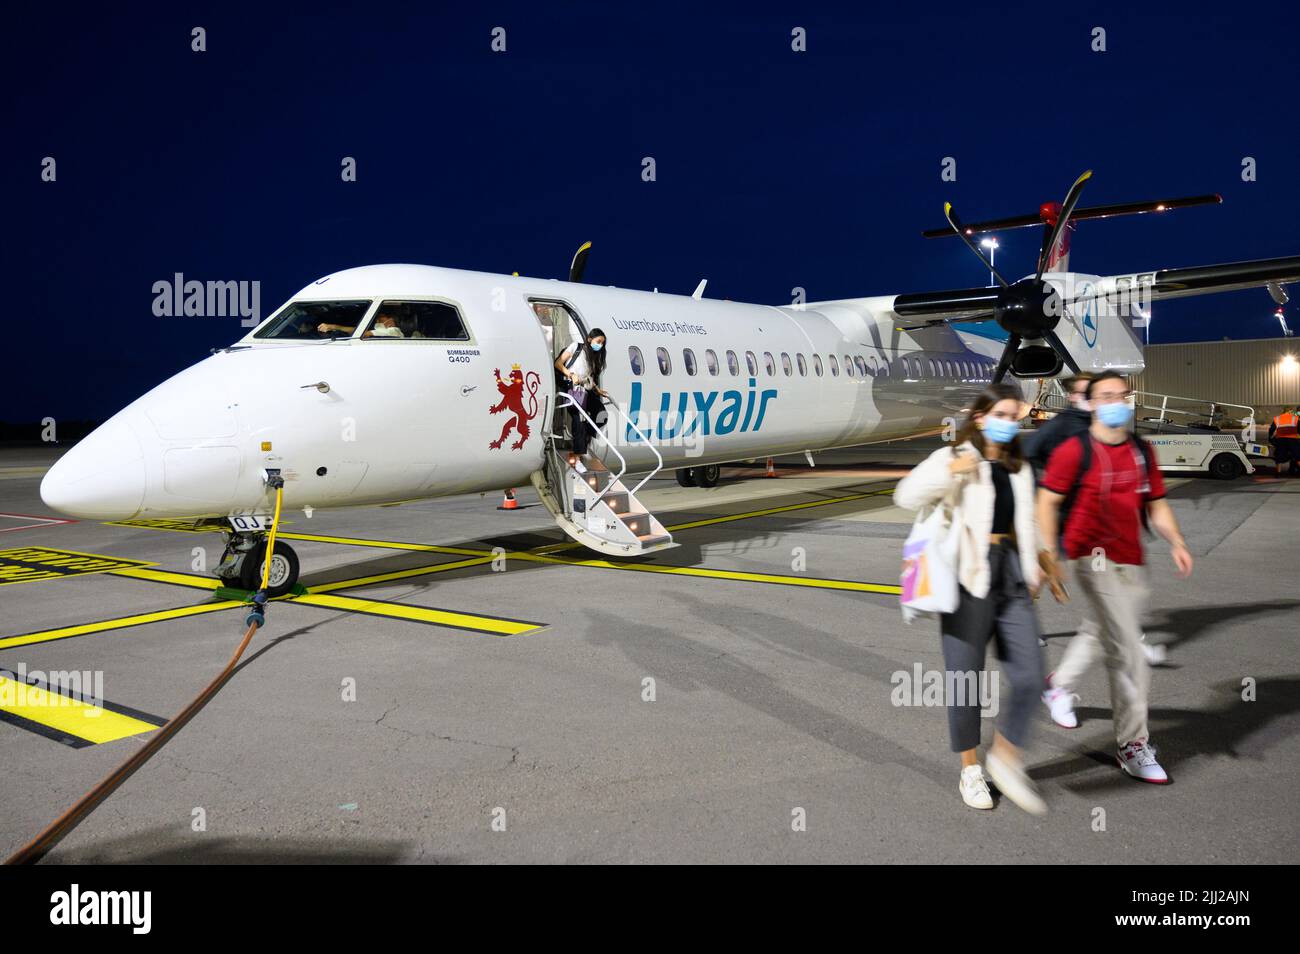 Passengers getting off a landed Luxair (Luxembourg Airlines) airplane (Bombardier Q400) at the Luxembourg Airport. Stock Photo